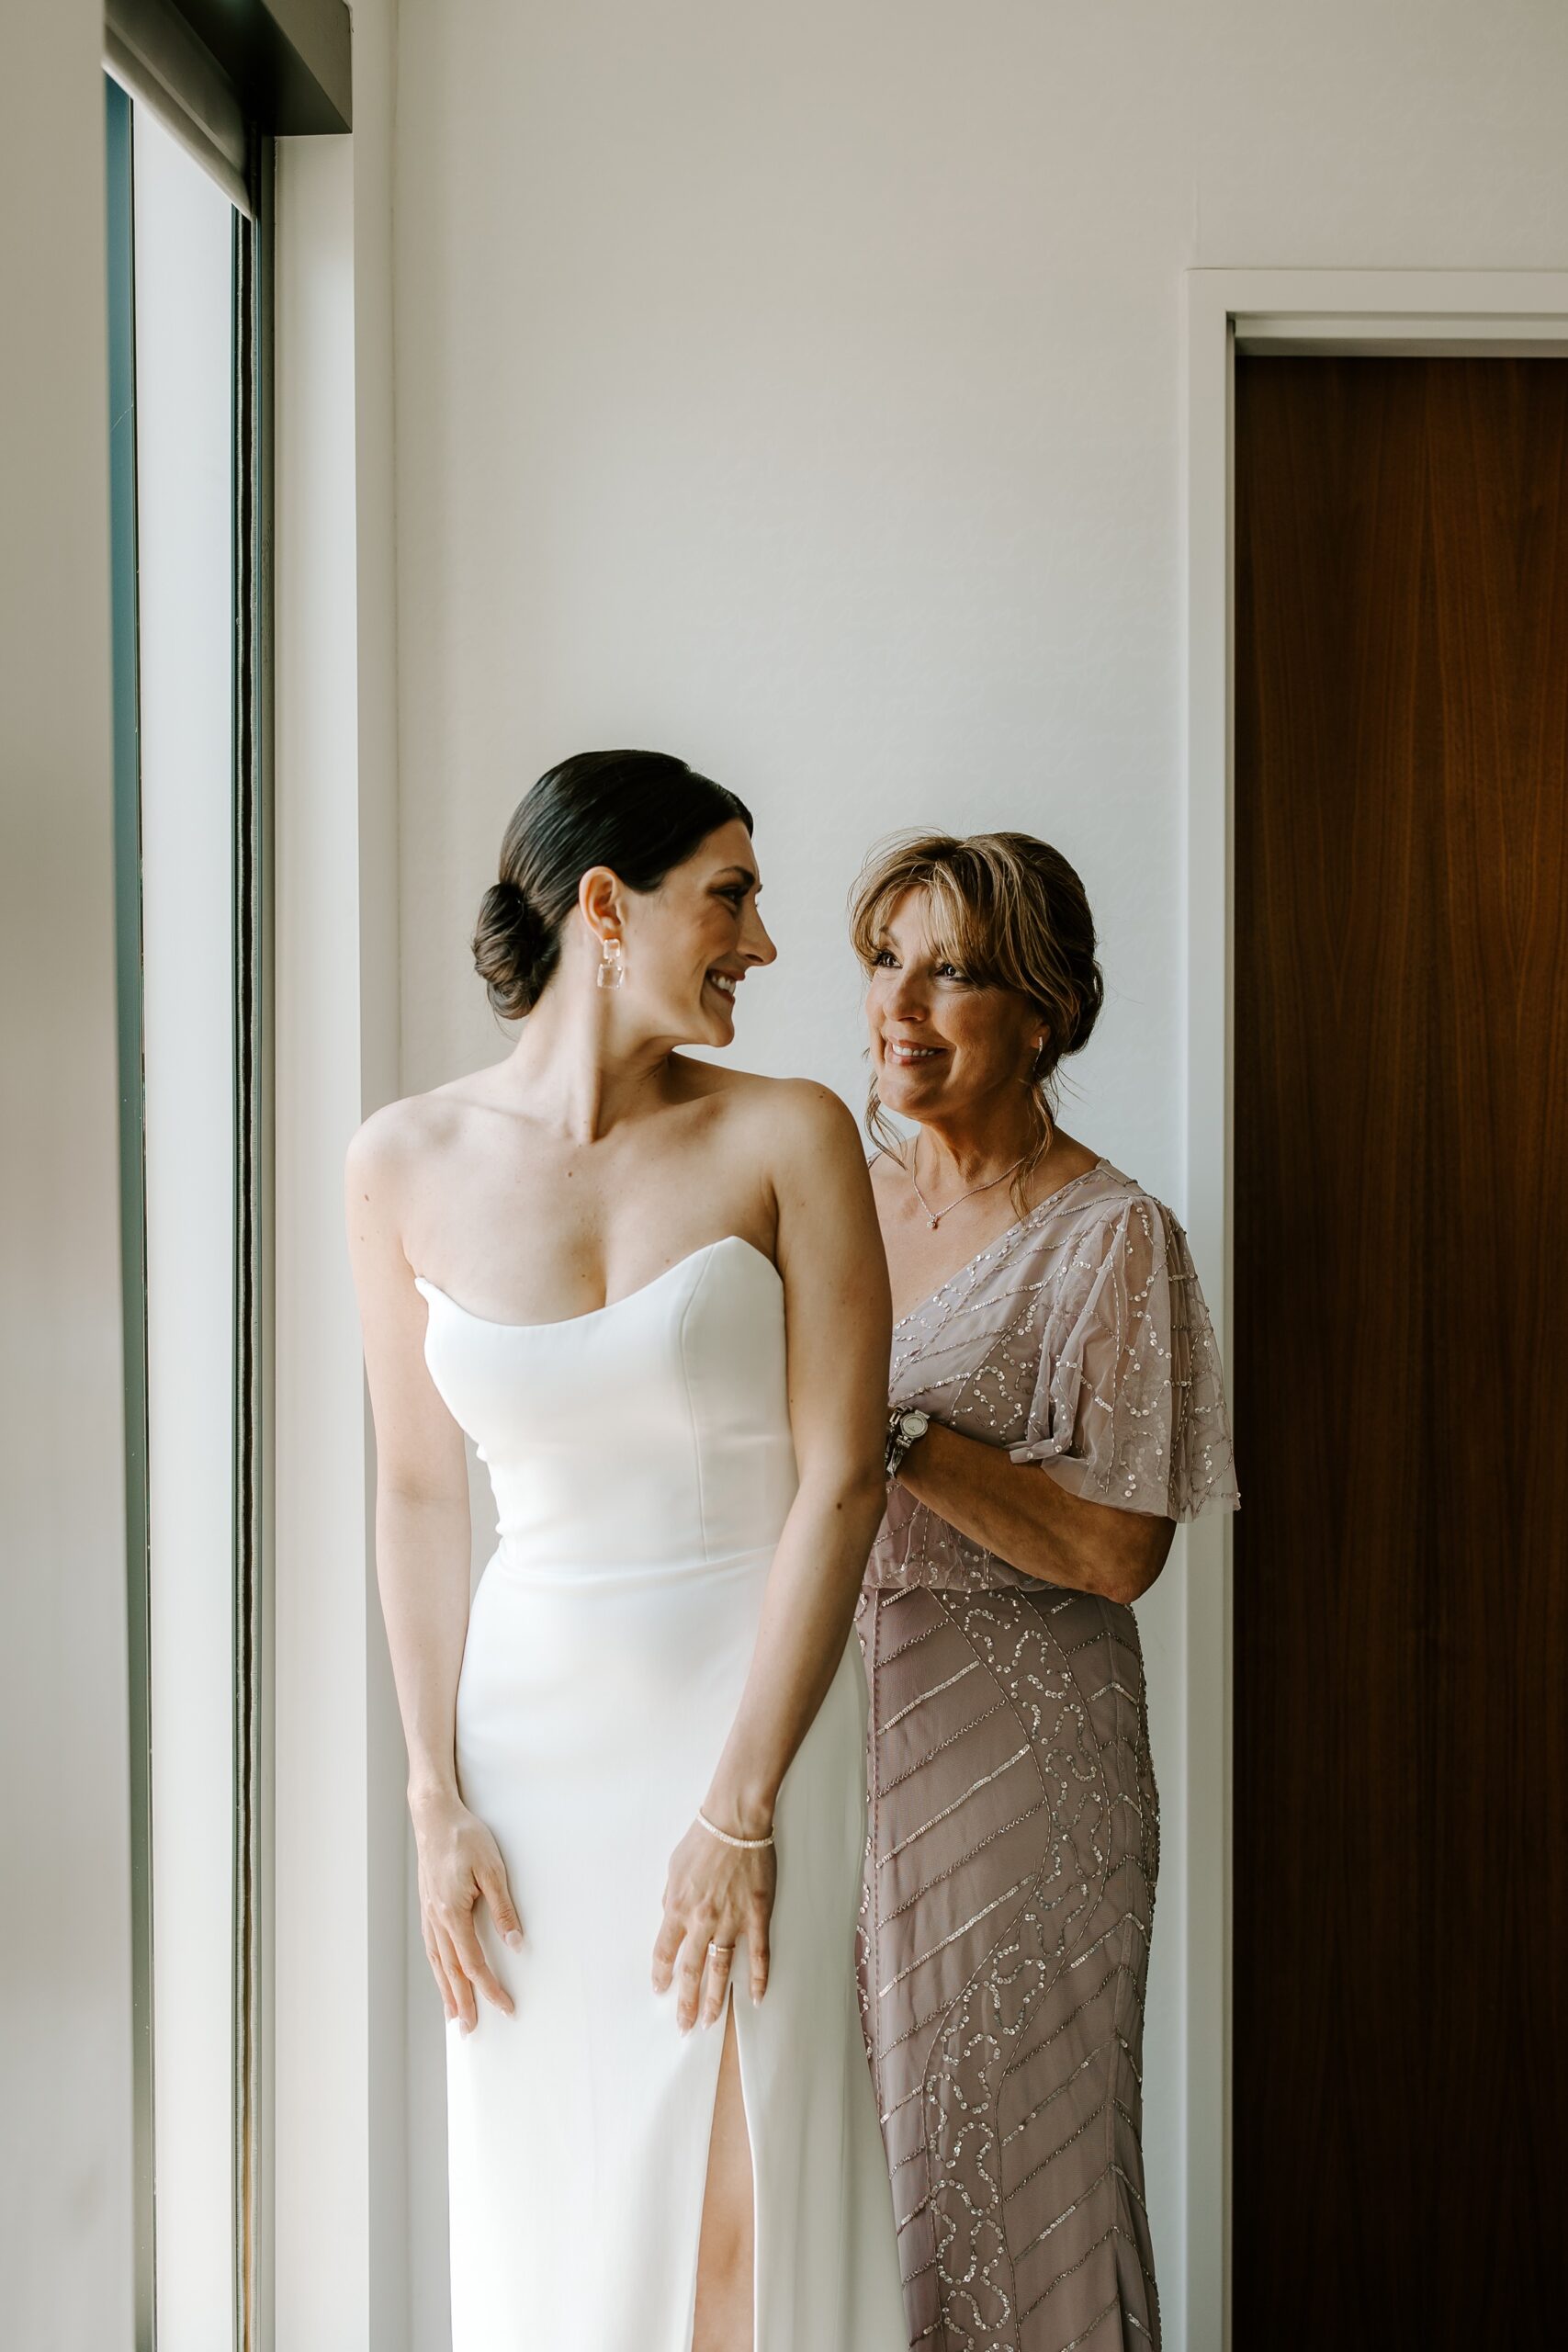 Bride gets into wedding dress with mother's help